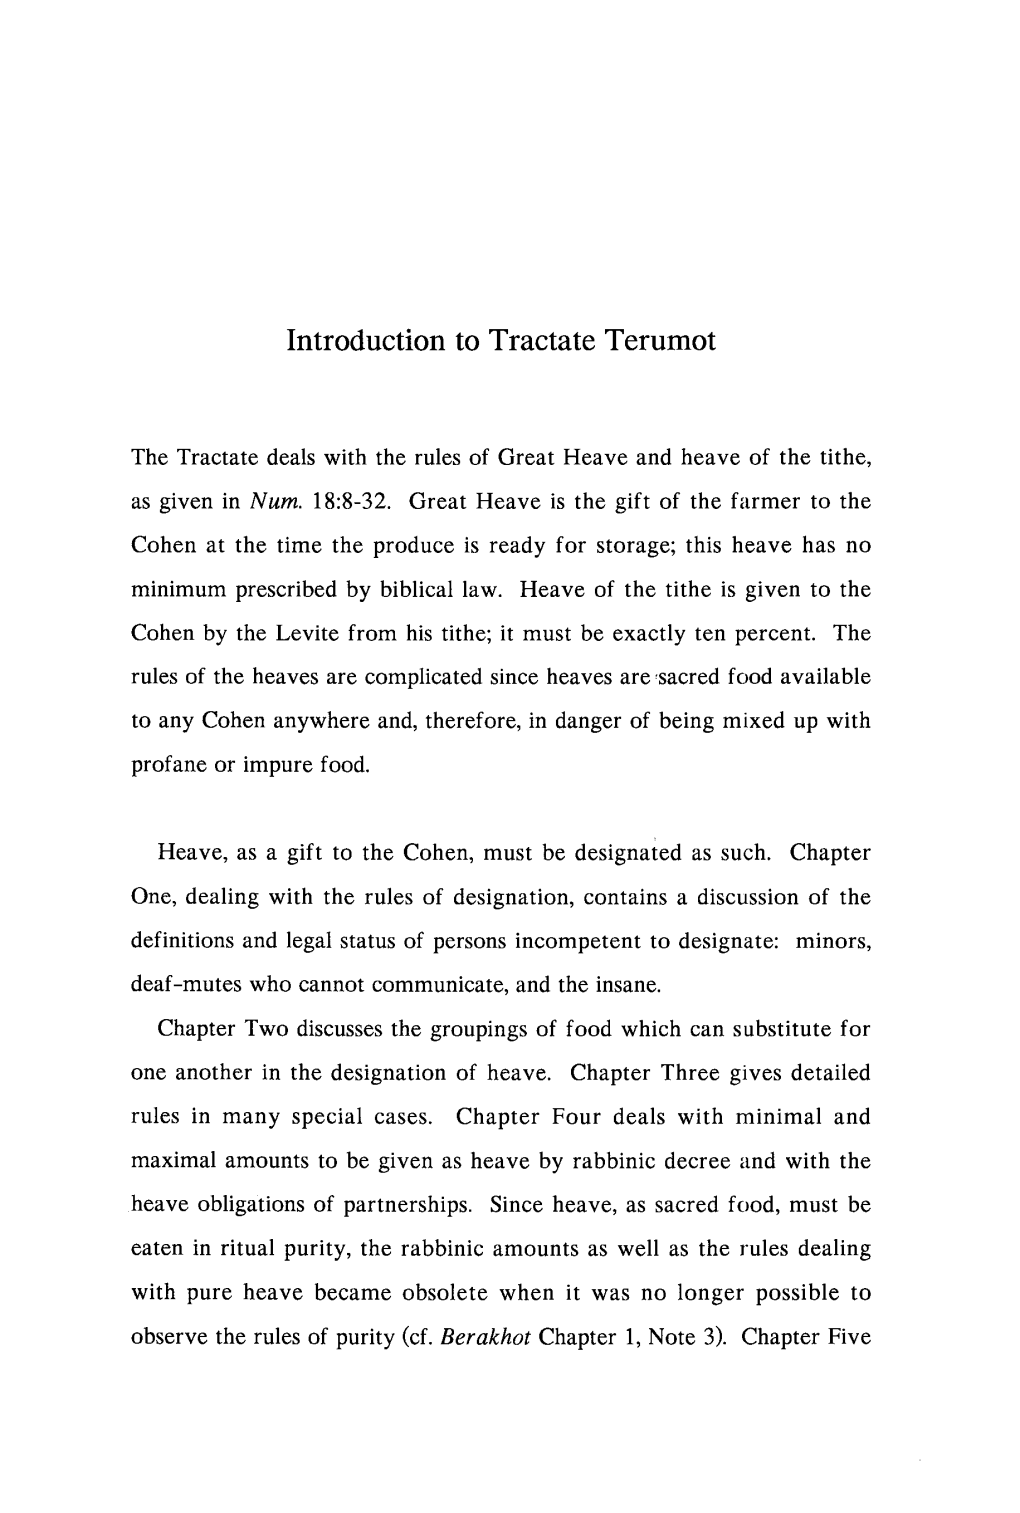 Introduction to Tractate Terumot